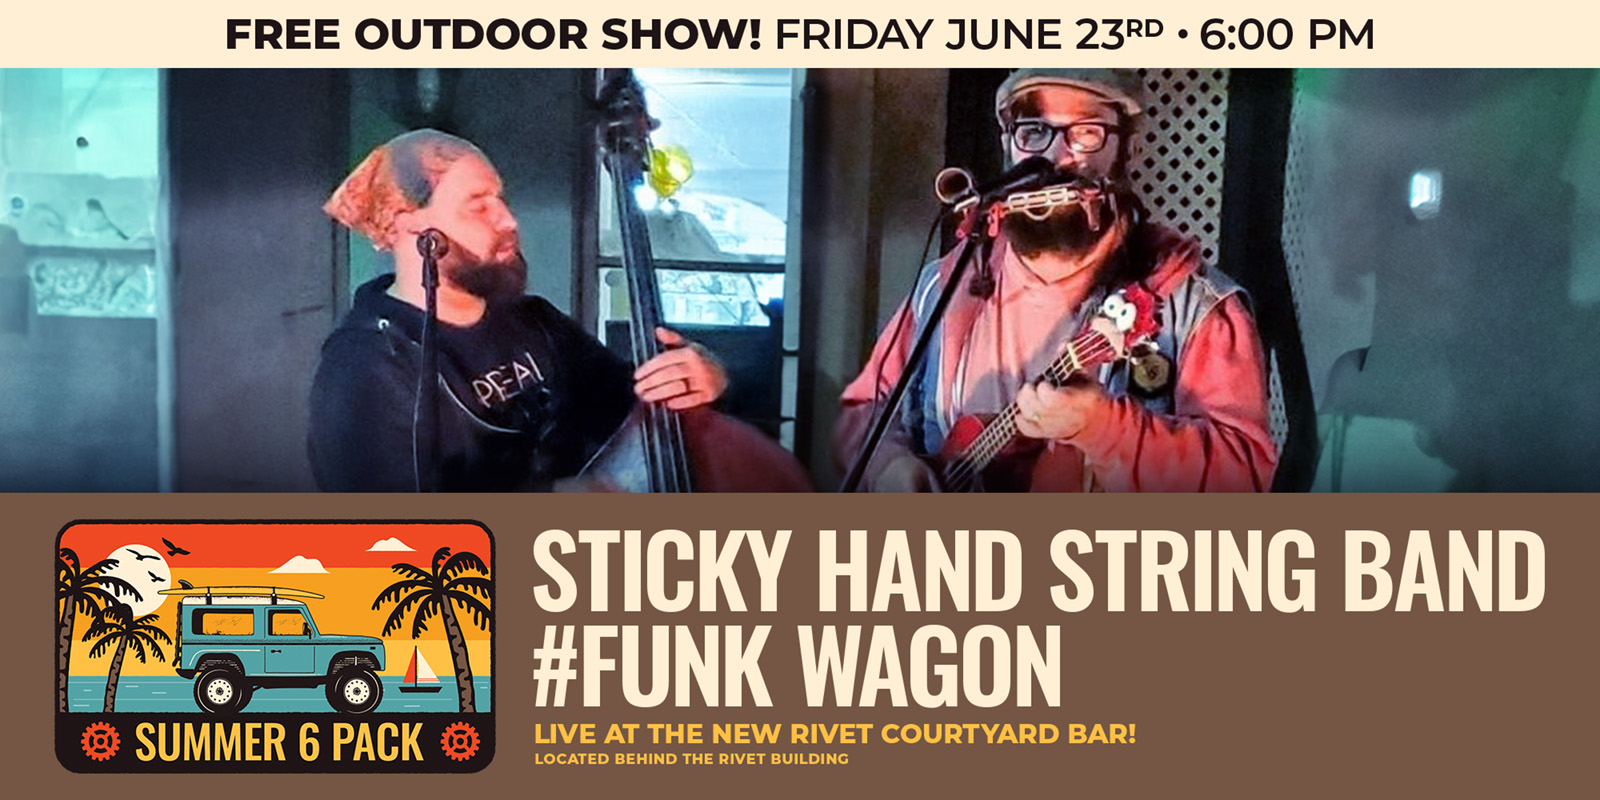 The Summer 6 Pack Free Outdoor Series continues at Rivet: Canteen & Assembly with Sticky Hand String Band #Funk Wagon on Friday, June 23rd, 2023. Join us!